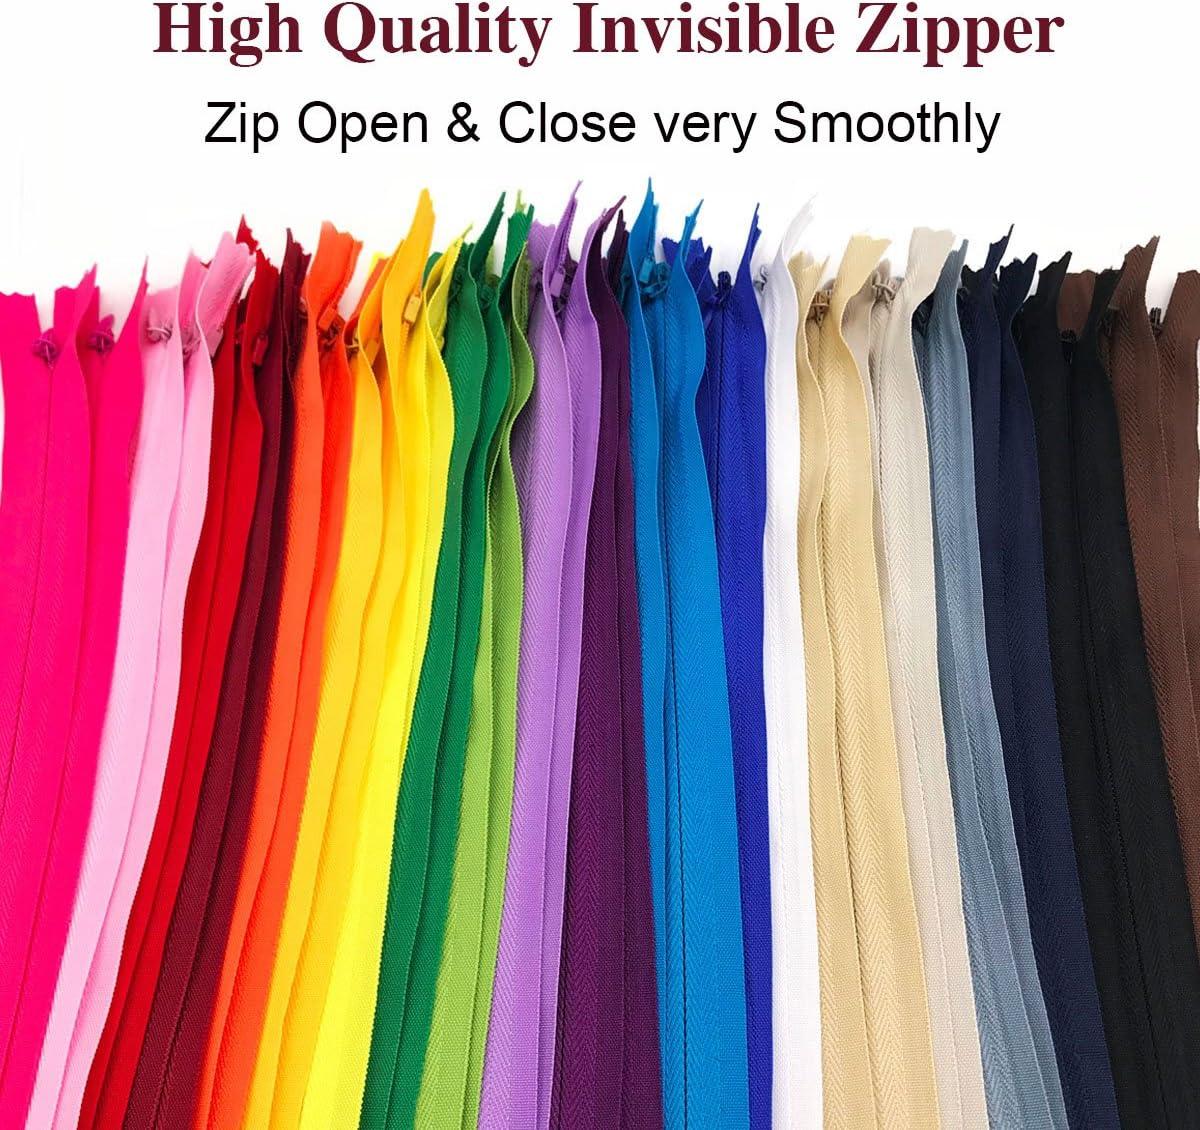 Concealed Zip Nylon Invisible Zipper for Sewing, 16 Inch